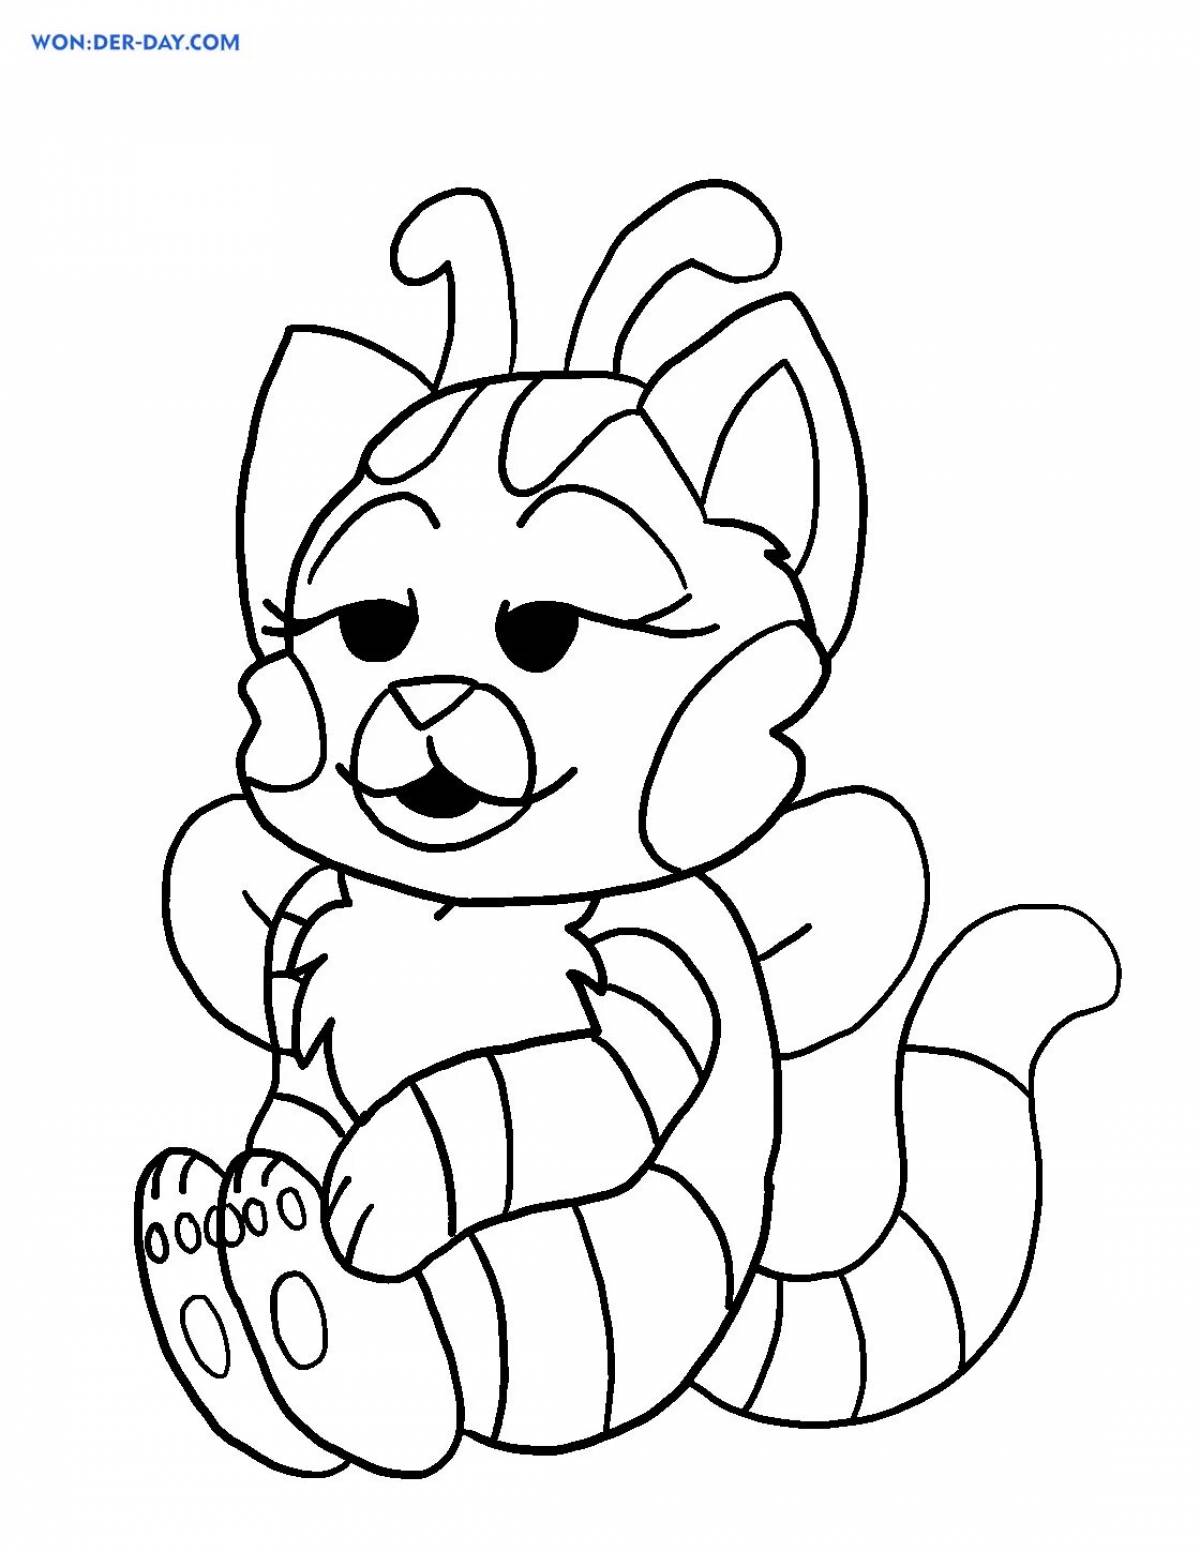 Fabulous cat and bee coloring page